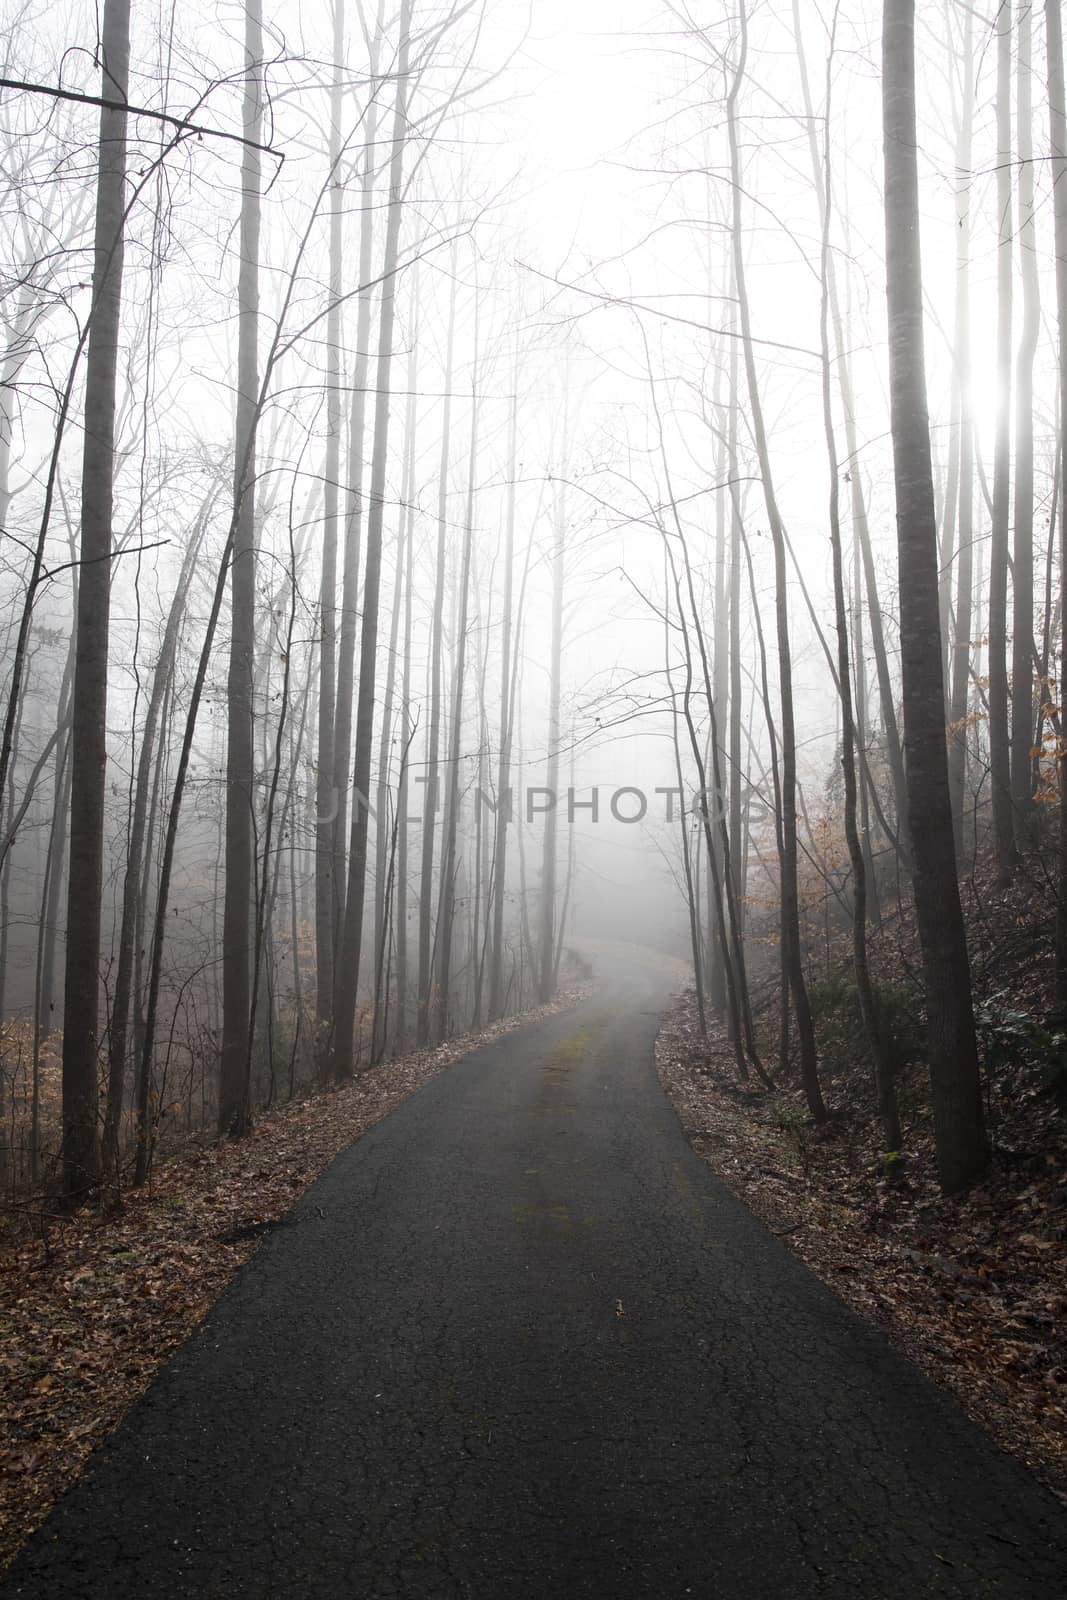 View down a rural, wooded drive in morning fog. Looking toward the sun and downhill.